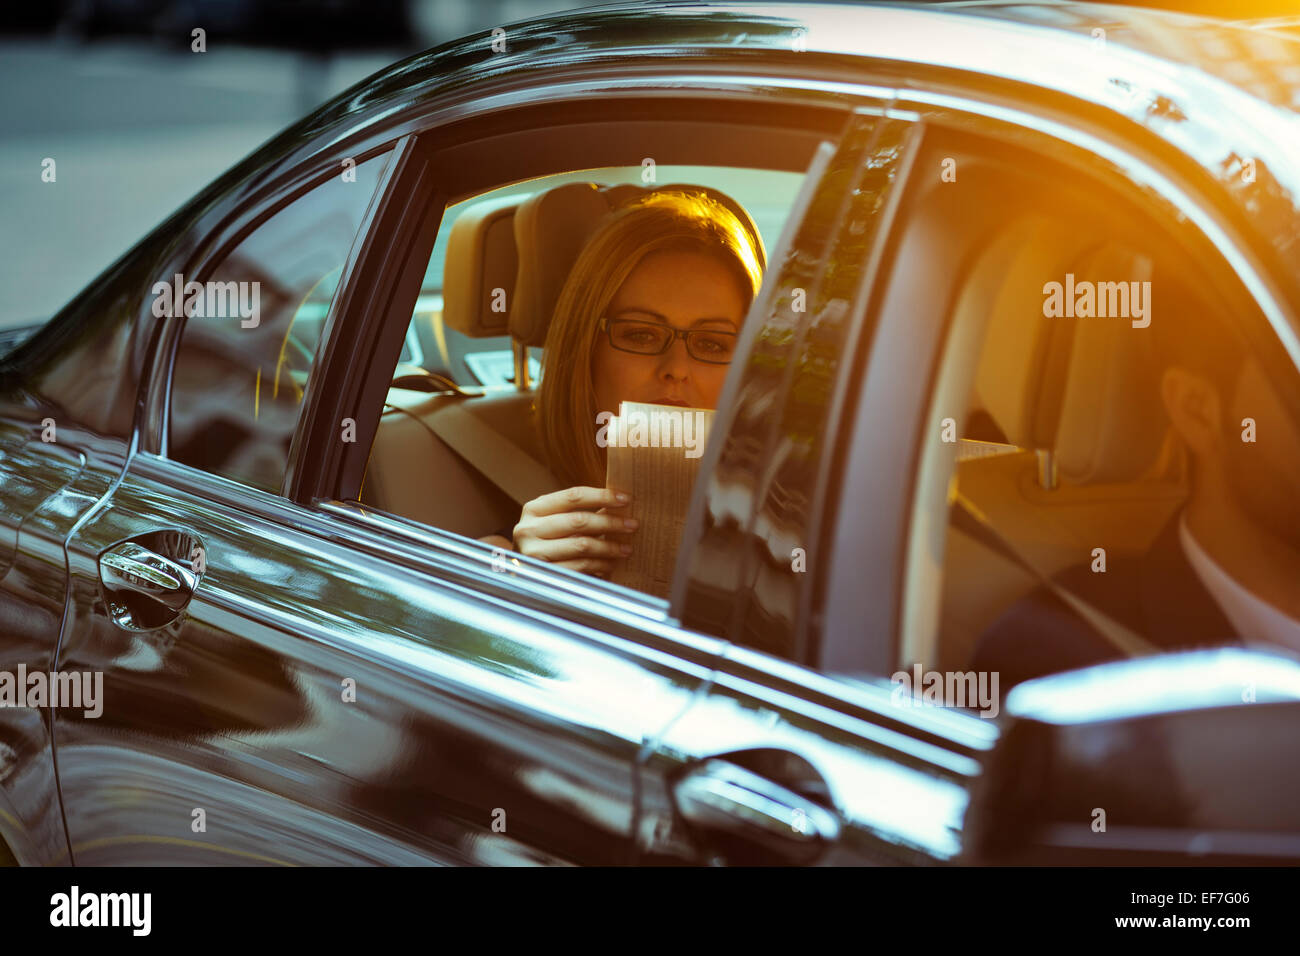 Businesswoman reading newspaper in back seat of car Banque D'Images